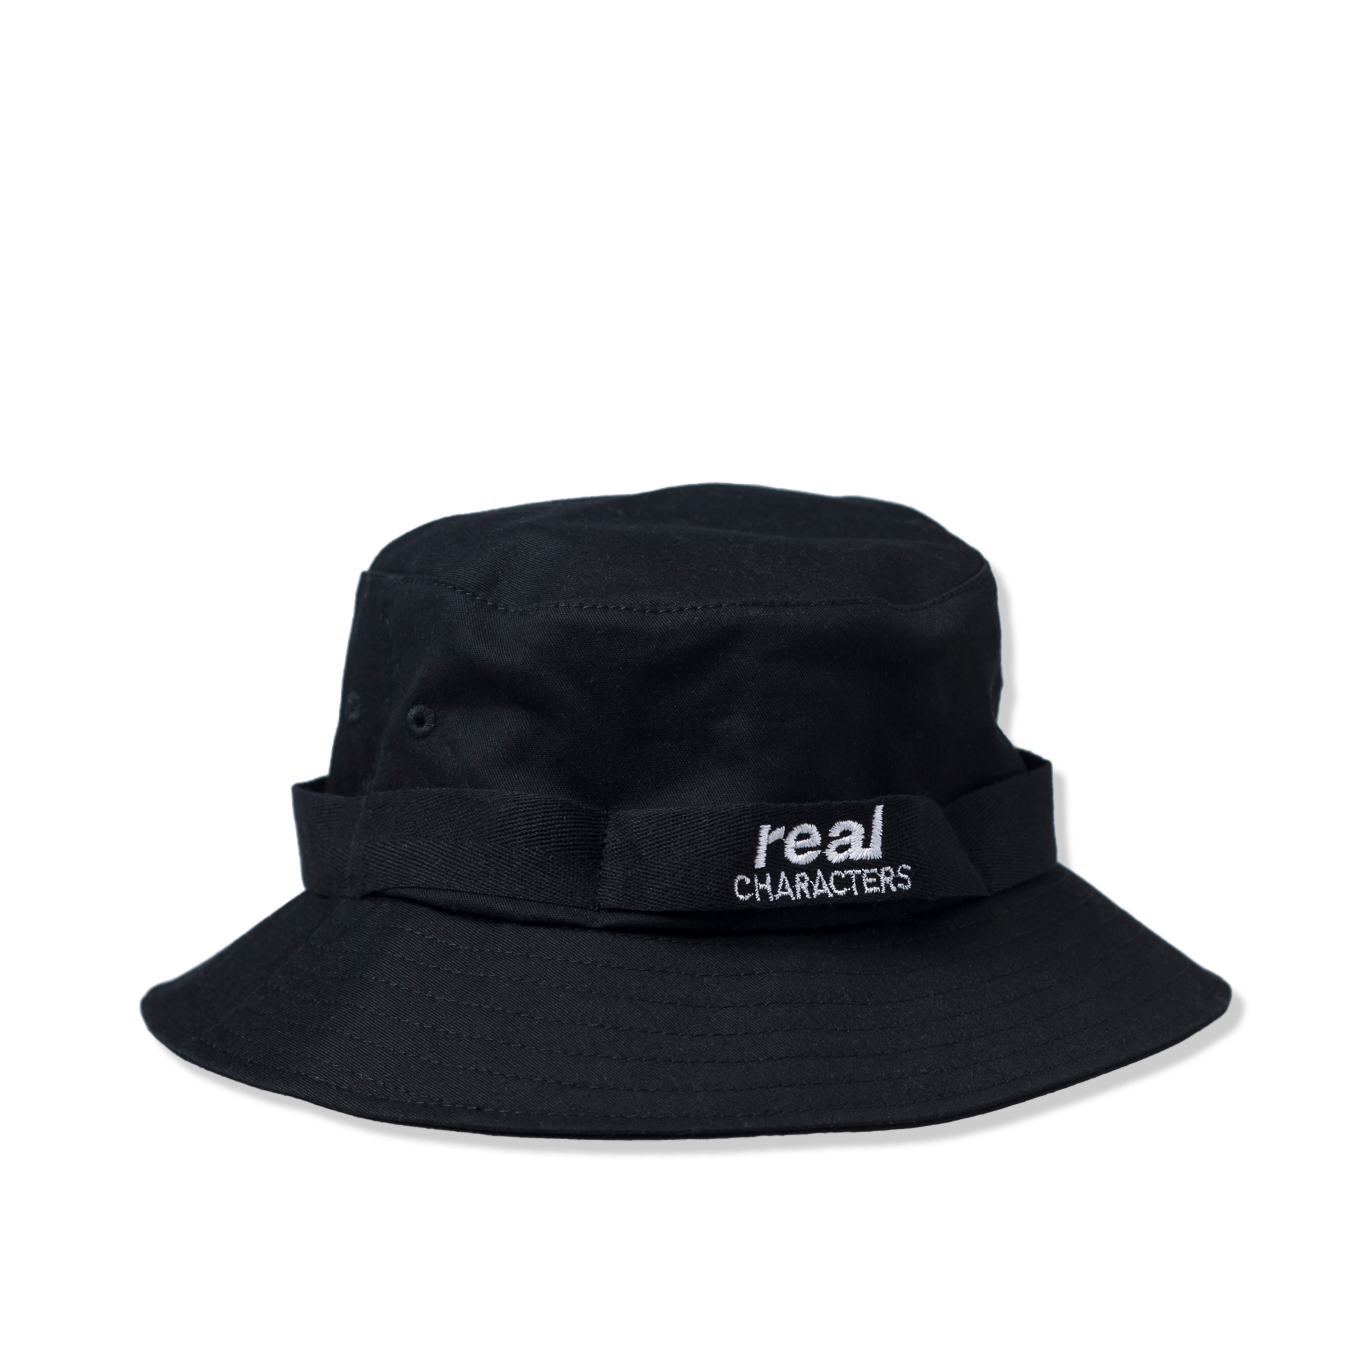 Next Level Bucket Hat, Black – Real Characters